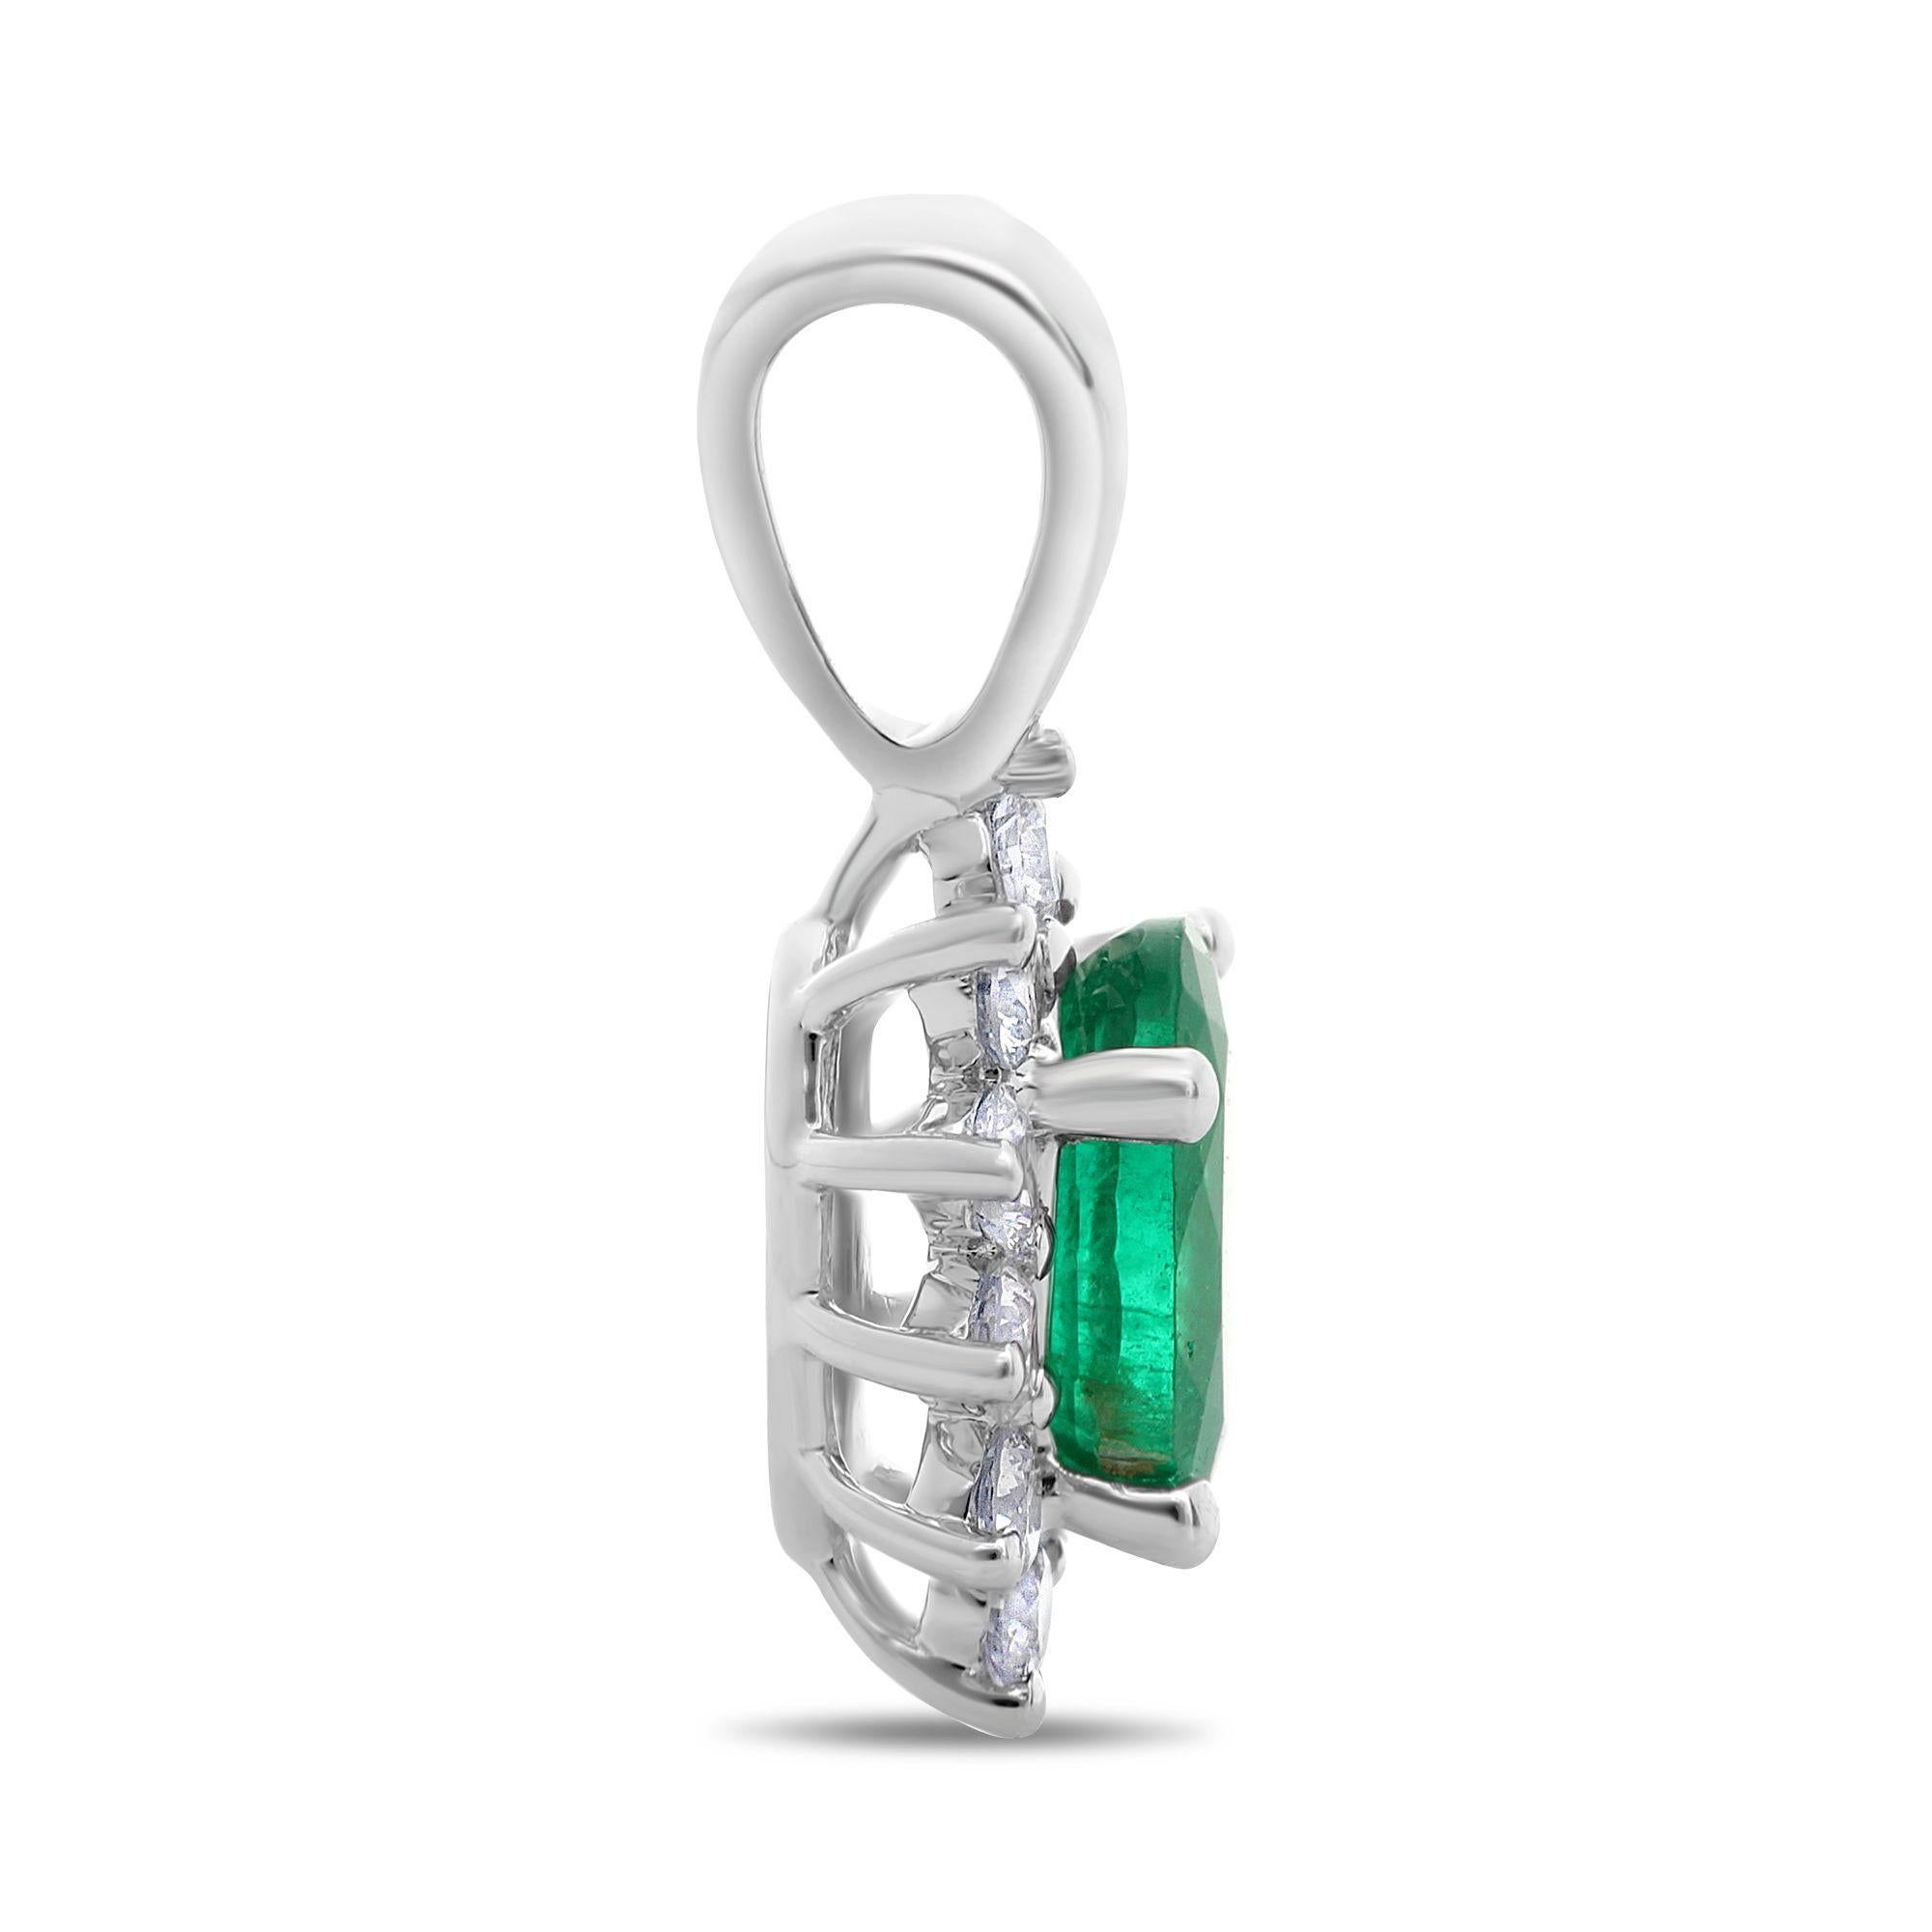 Made of 18K white gold, this pendant showcases a 0.46 carat, oval cut green emerald at the center. The colorful center stone is brought to life by 0.20 carats of round cut white diamonds in a sparkling single halo.

The center stone is of SI clarity